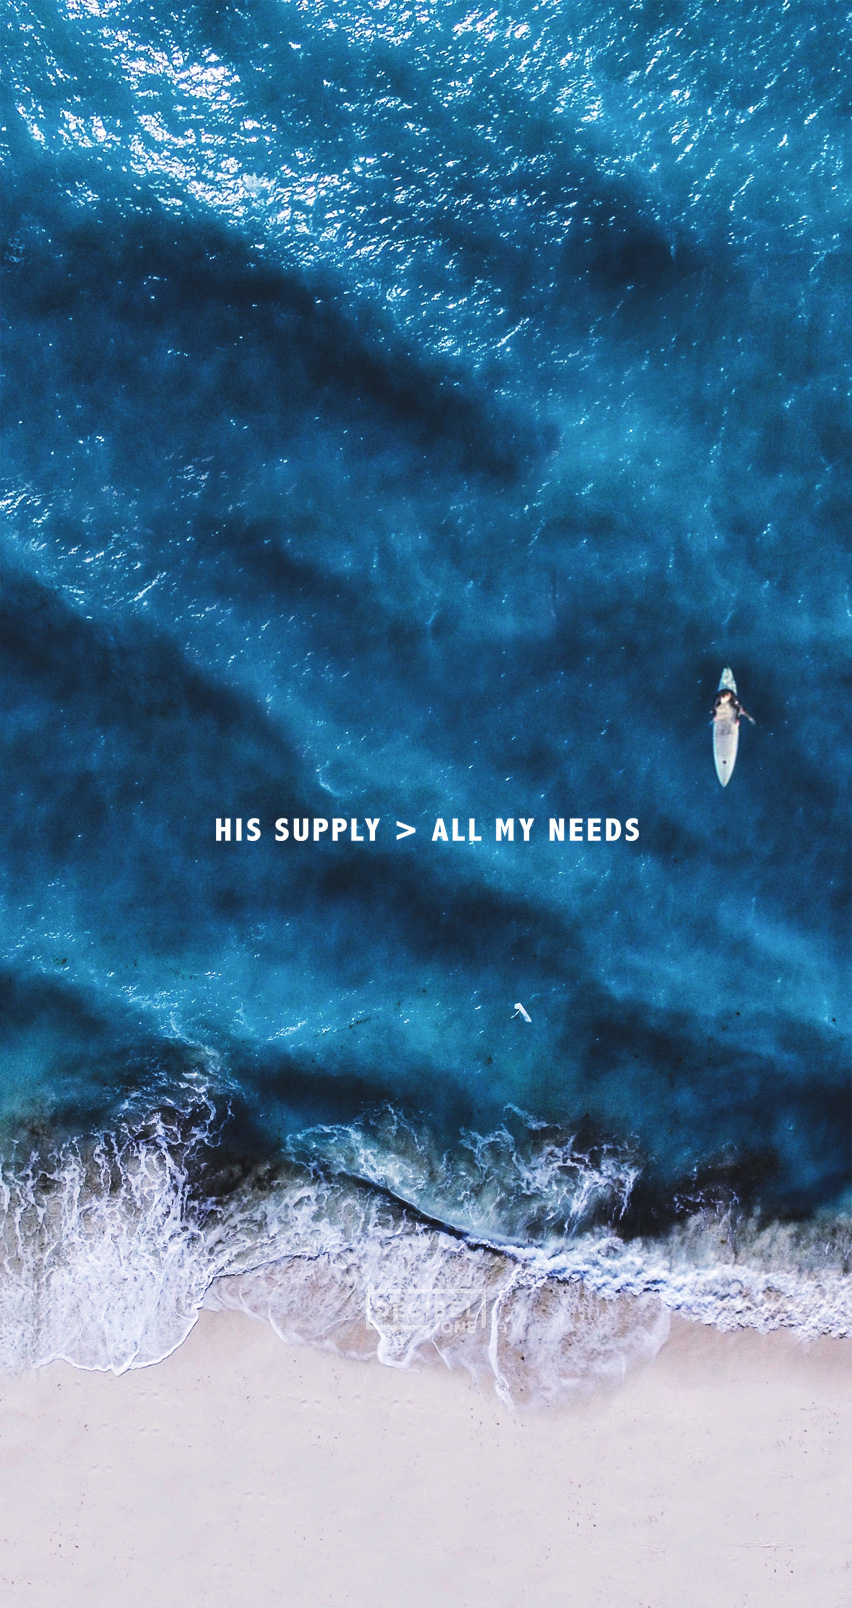 HIS SUPPLY > ALL MY NEEDS